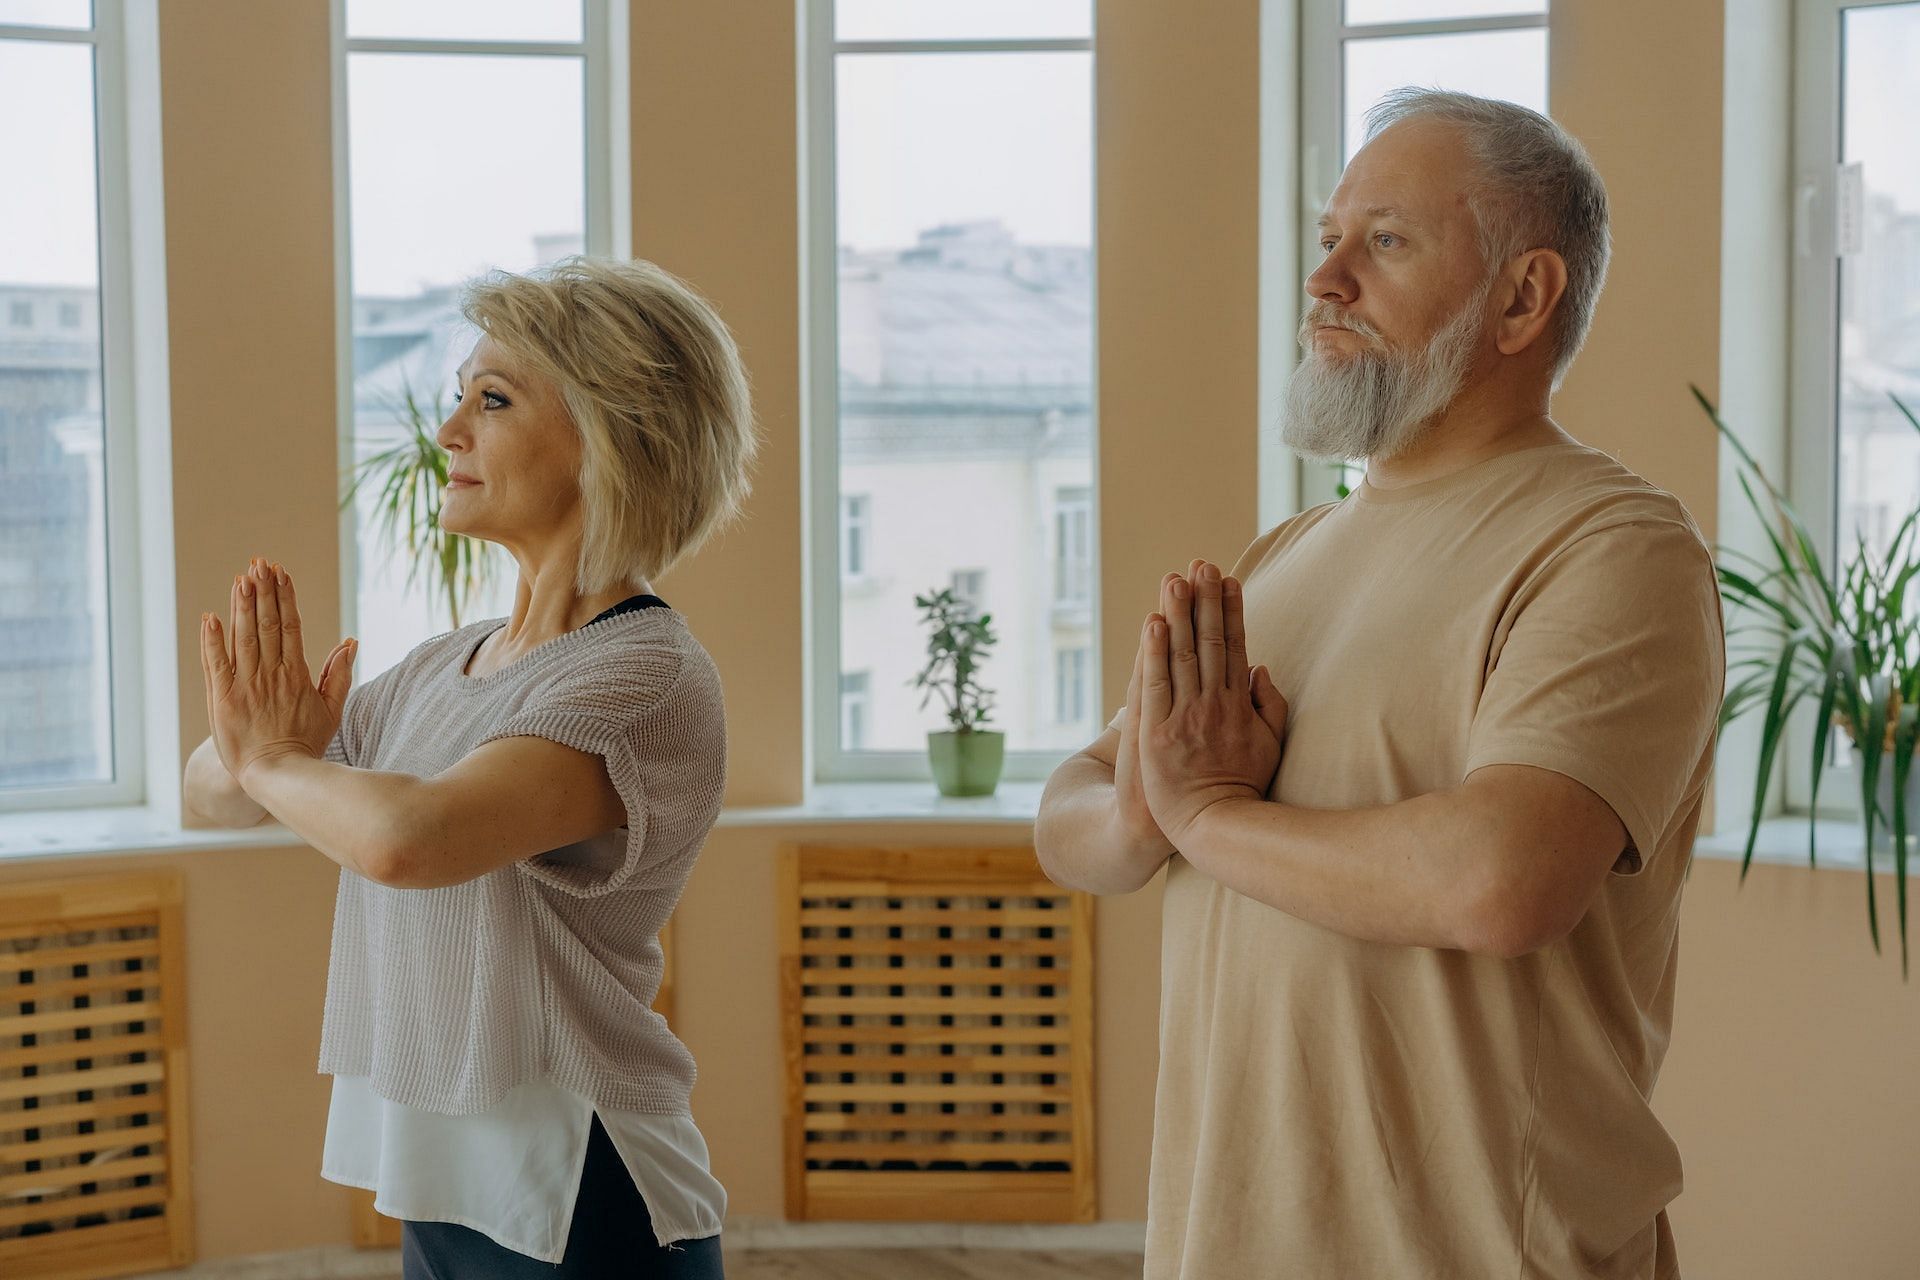 Prayer position stretch is one of the easiest wrist stretches. (Photo via Pexels/Mikhail Nilov)